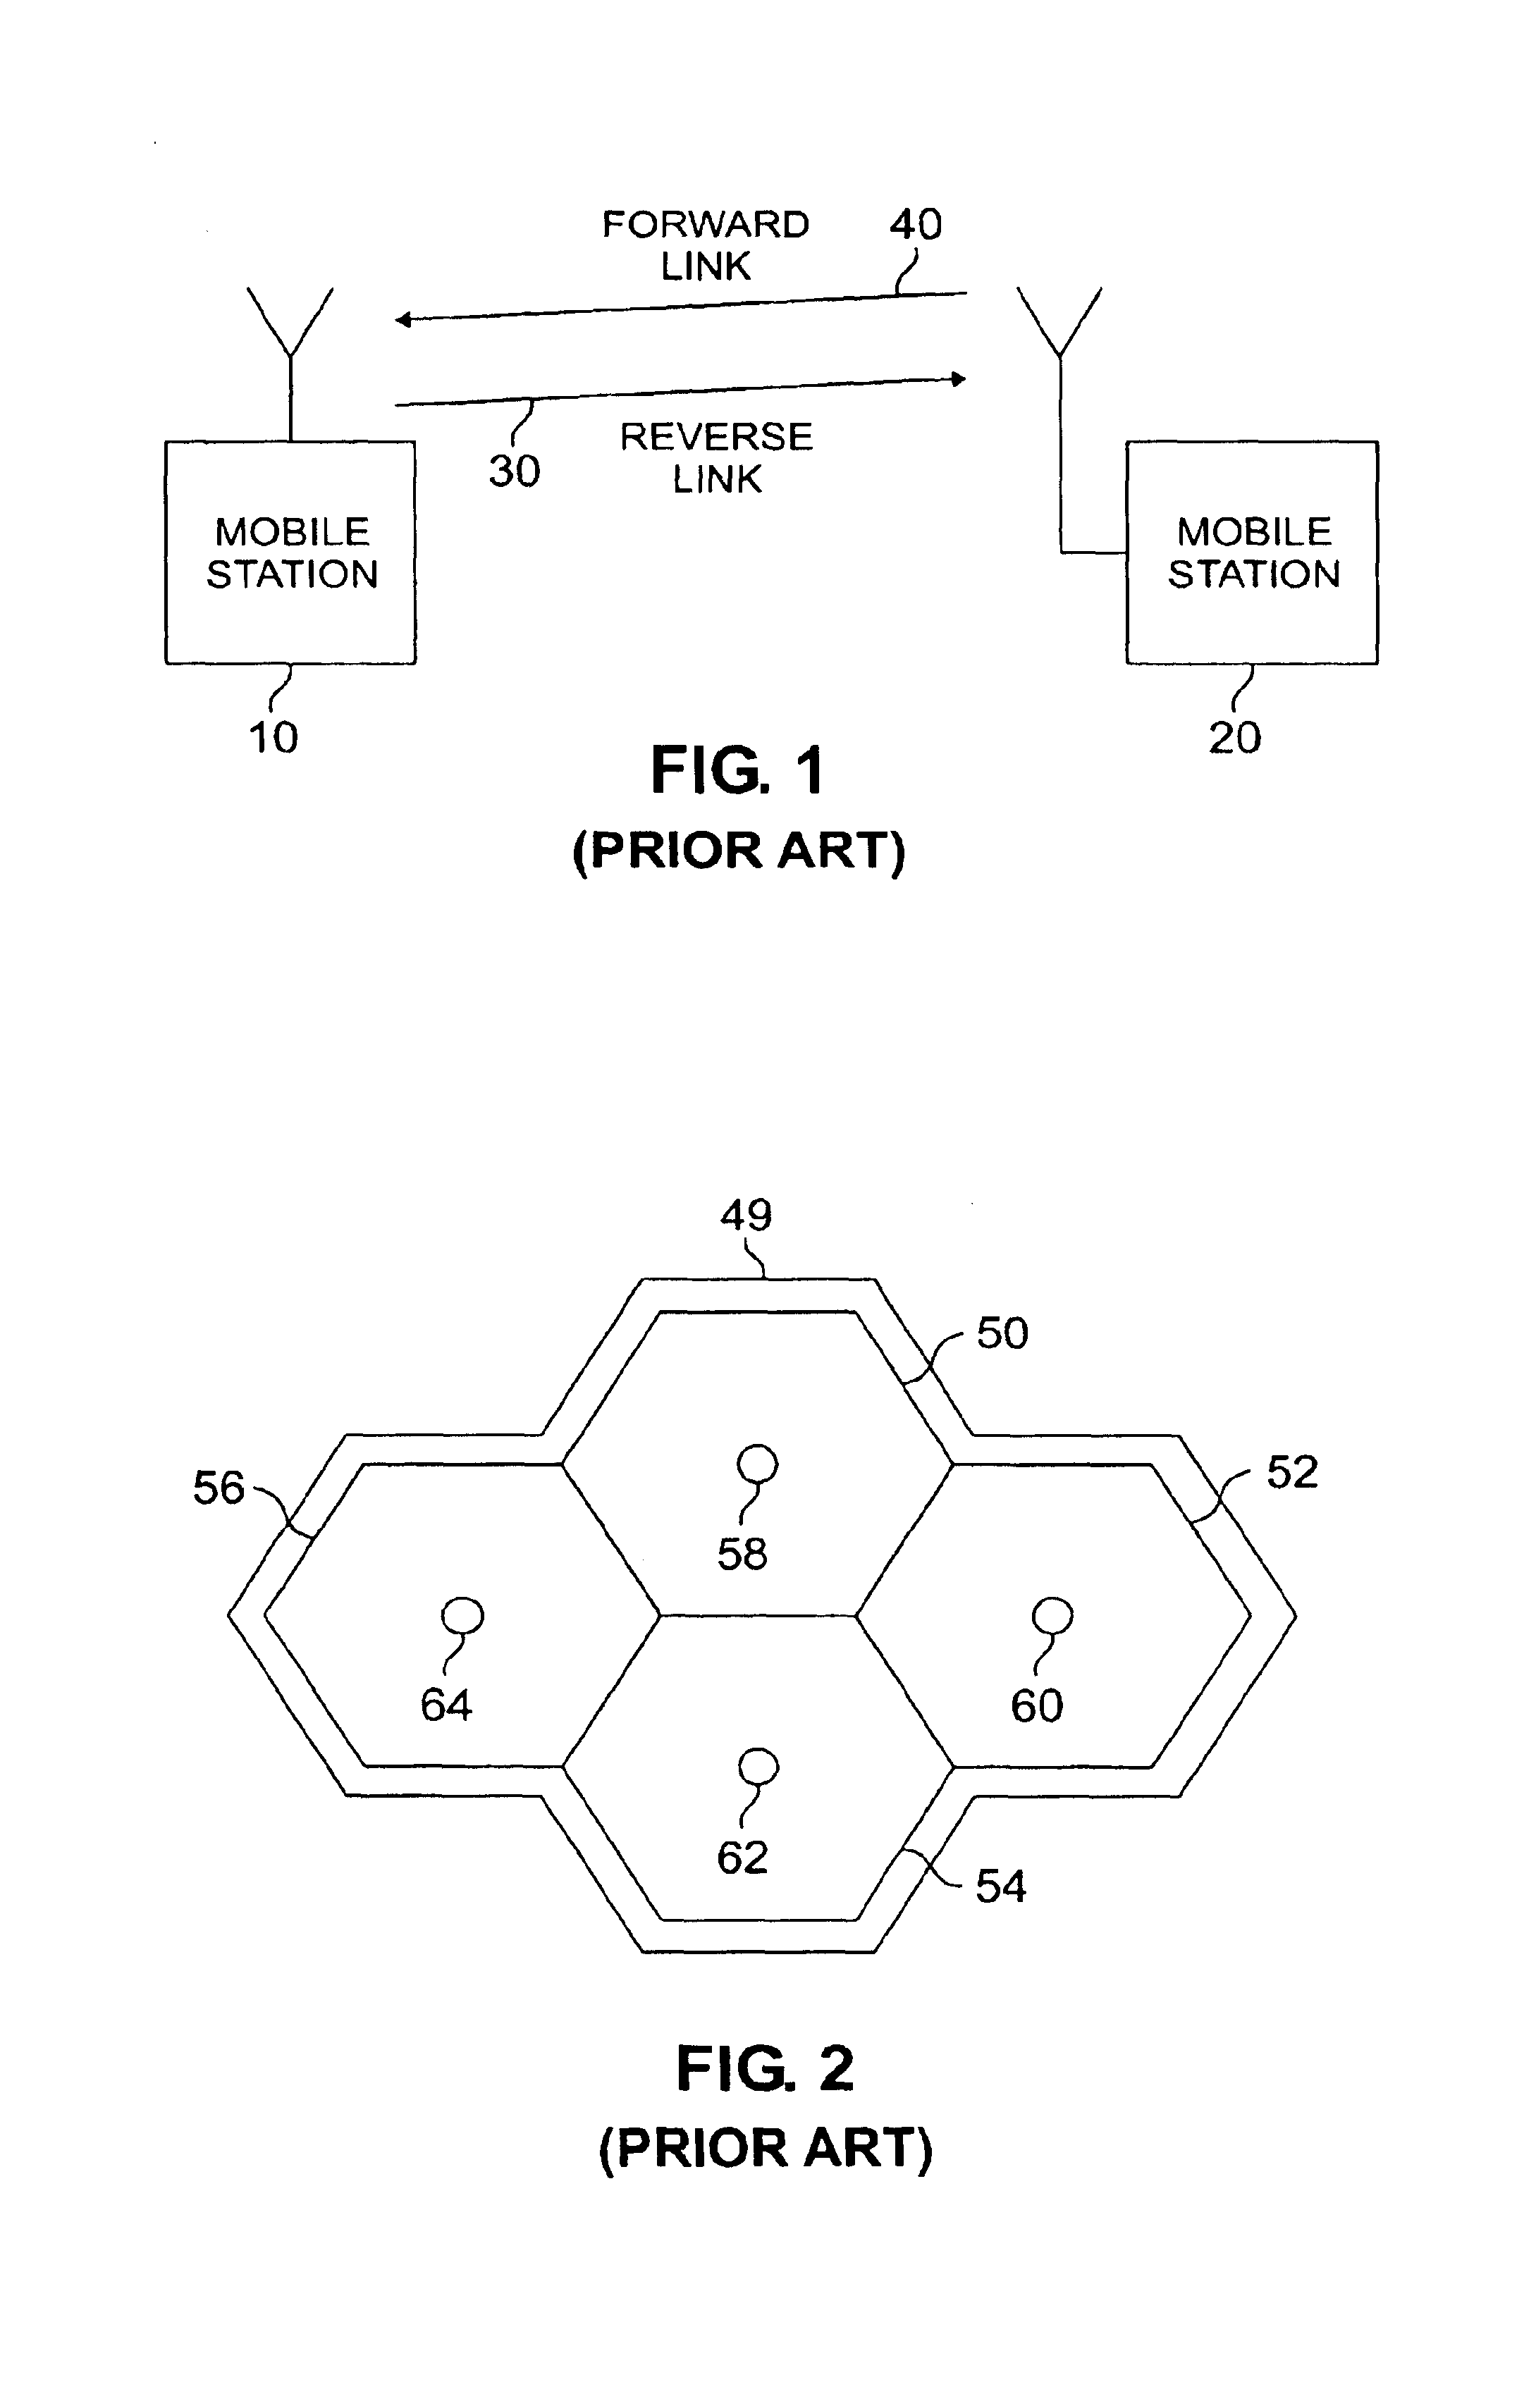 Distributed architecture for a base station transceiver subsystem having a radio unit that is remotely programmable